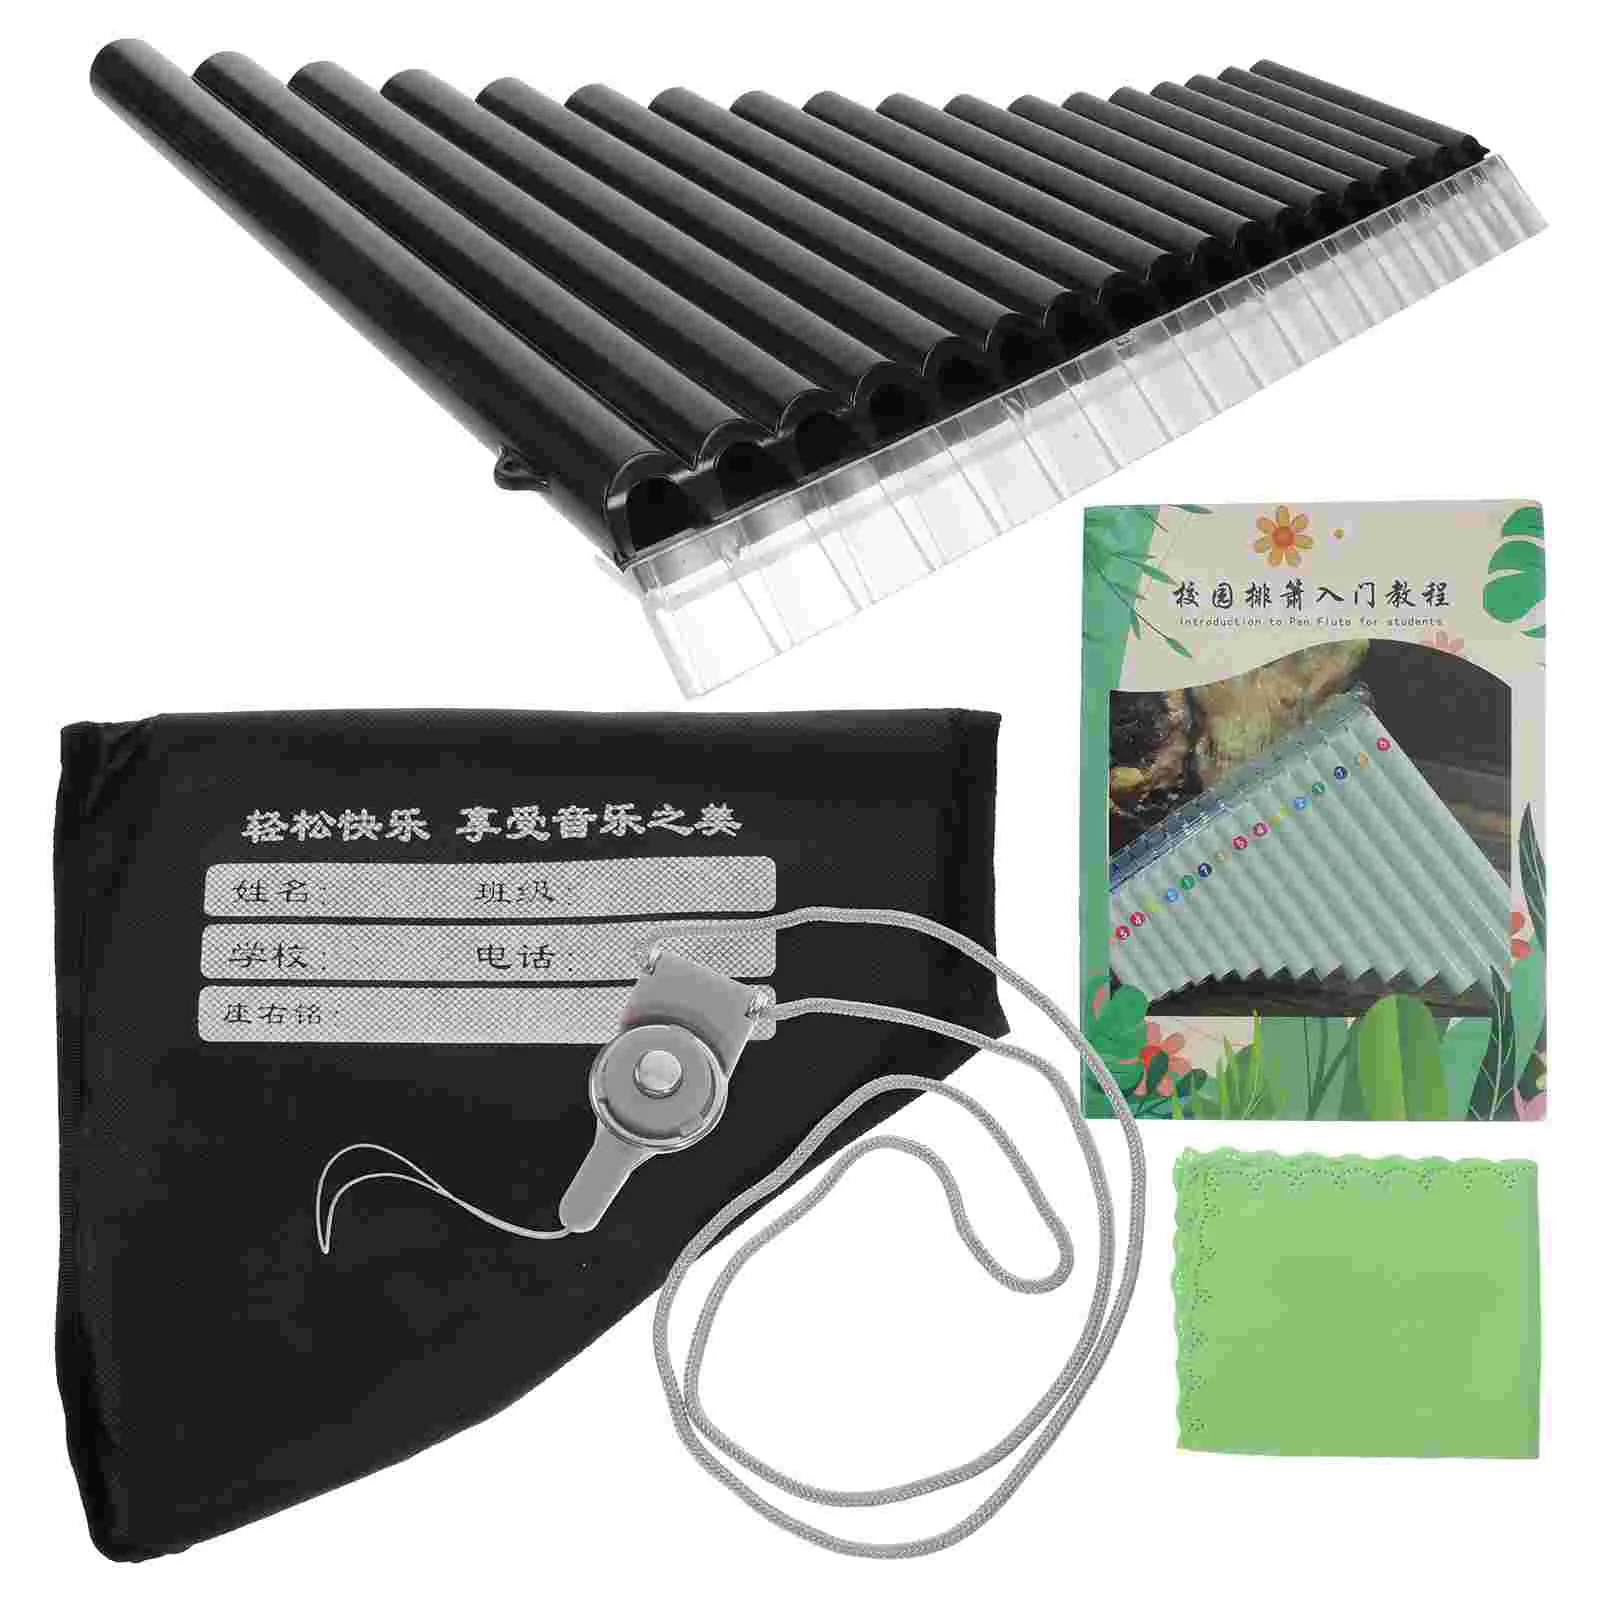 

Pan Flute Portable Panpipe Musical Instrument Traditional Exquisite 18 Pipes Key Beginner Keyboard Instruments